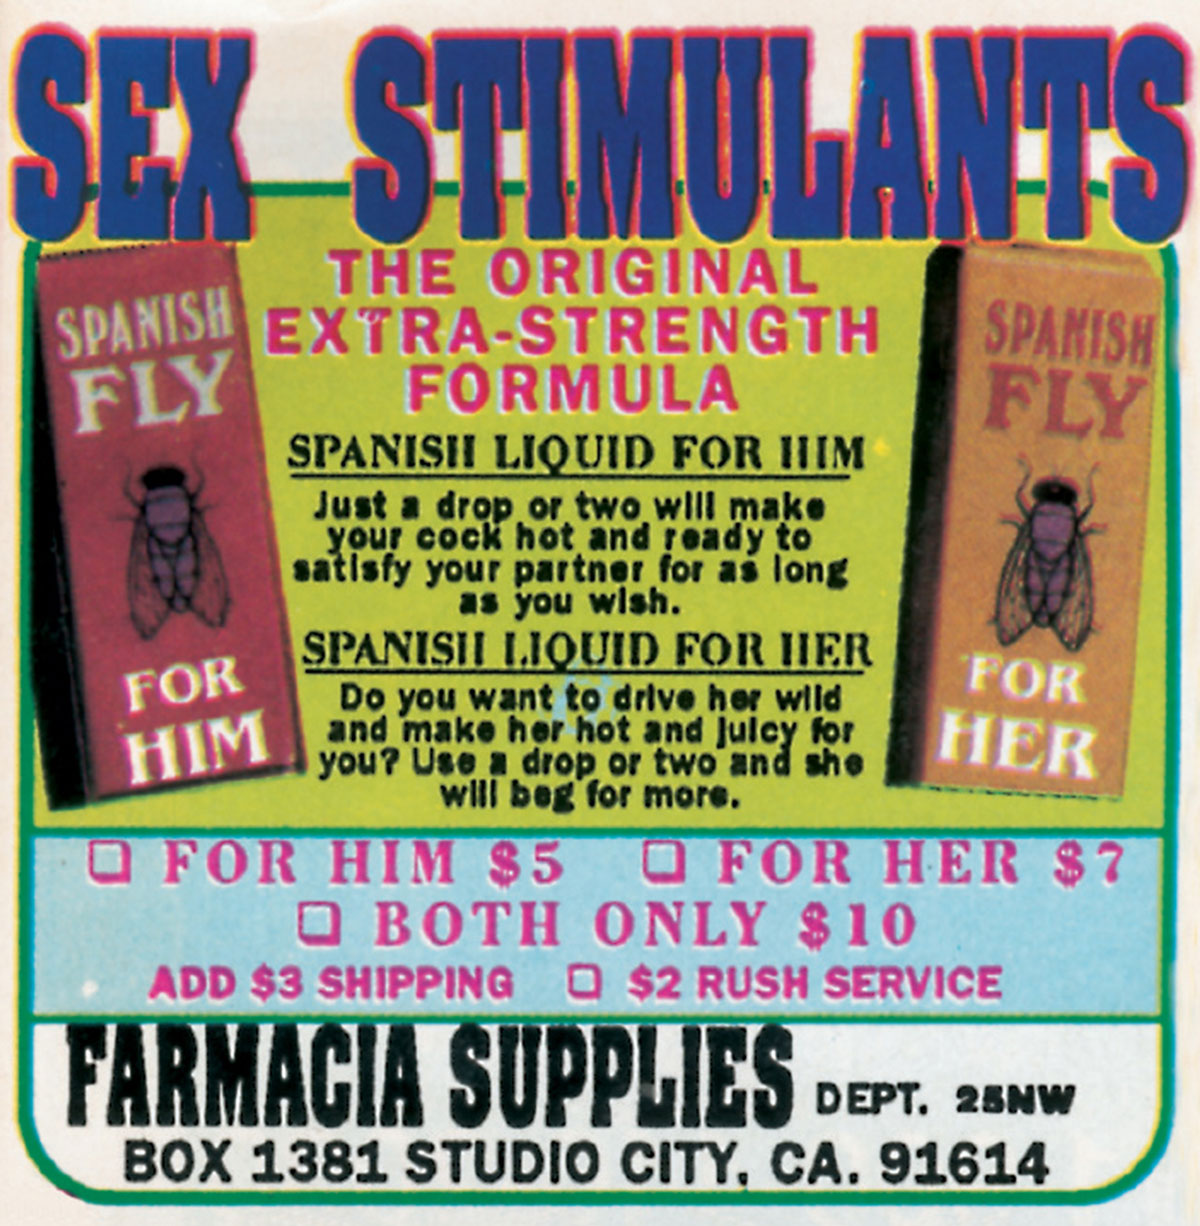 A magazine advertisement featuring Spanish fly for men and women.